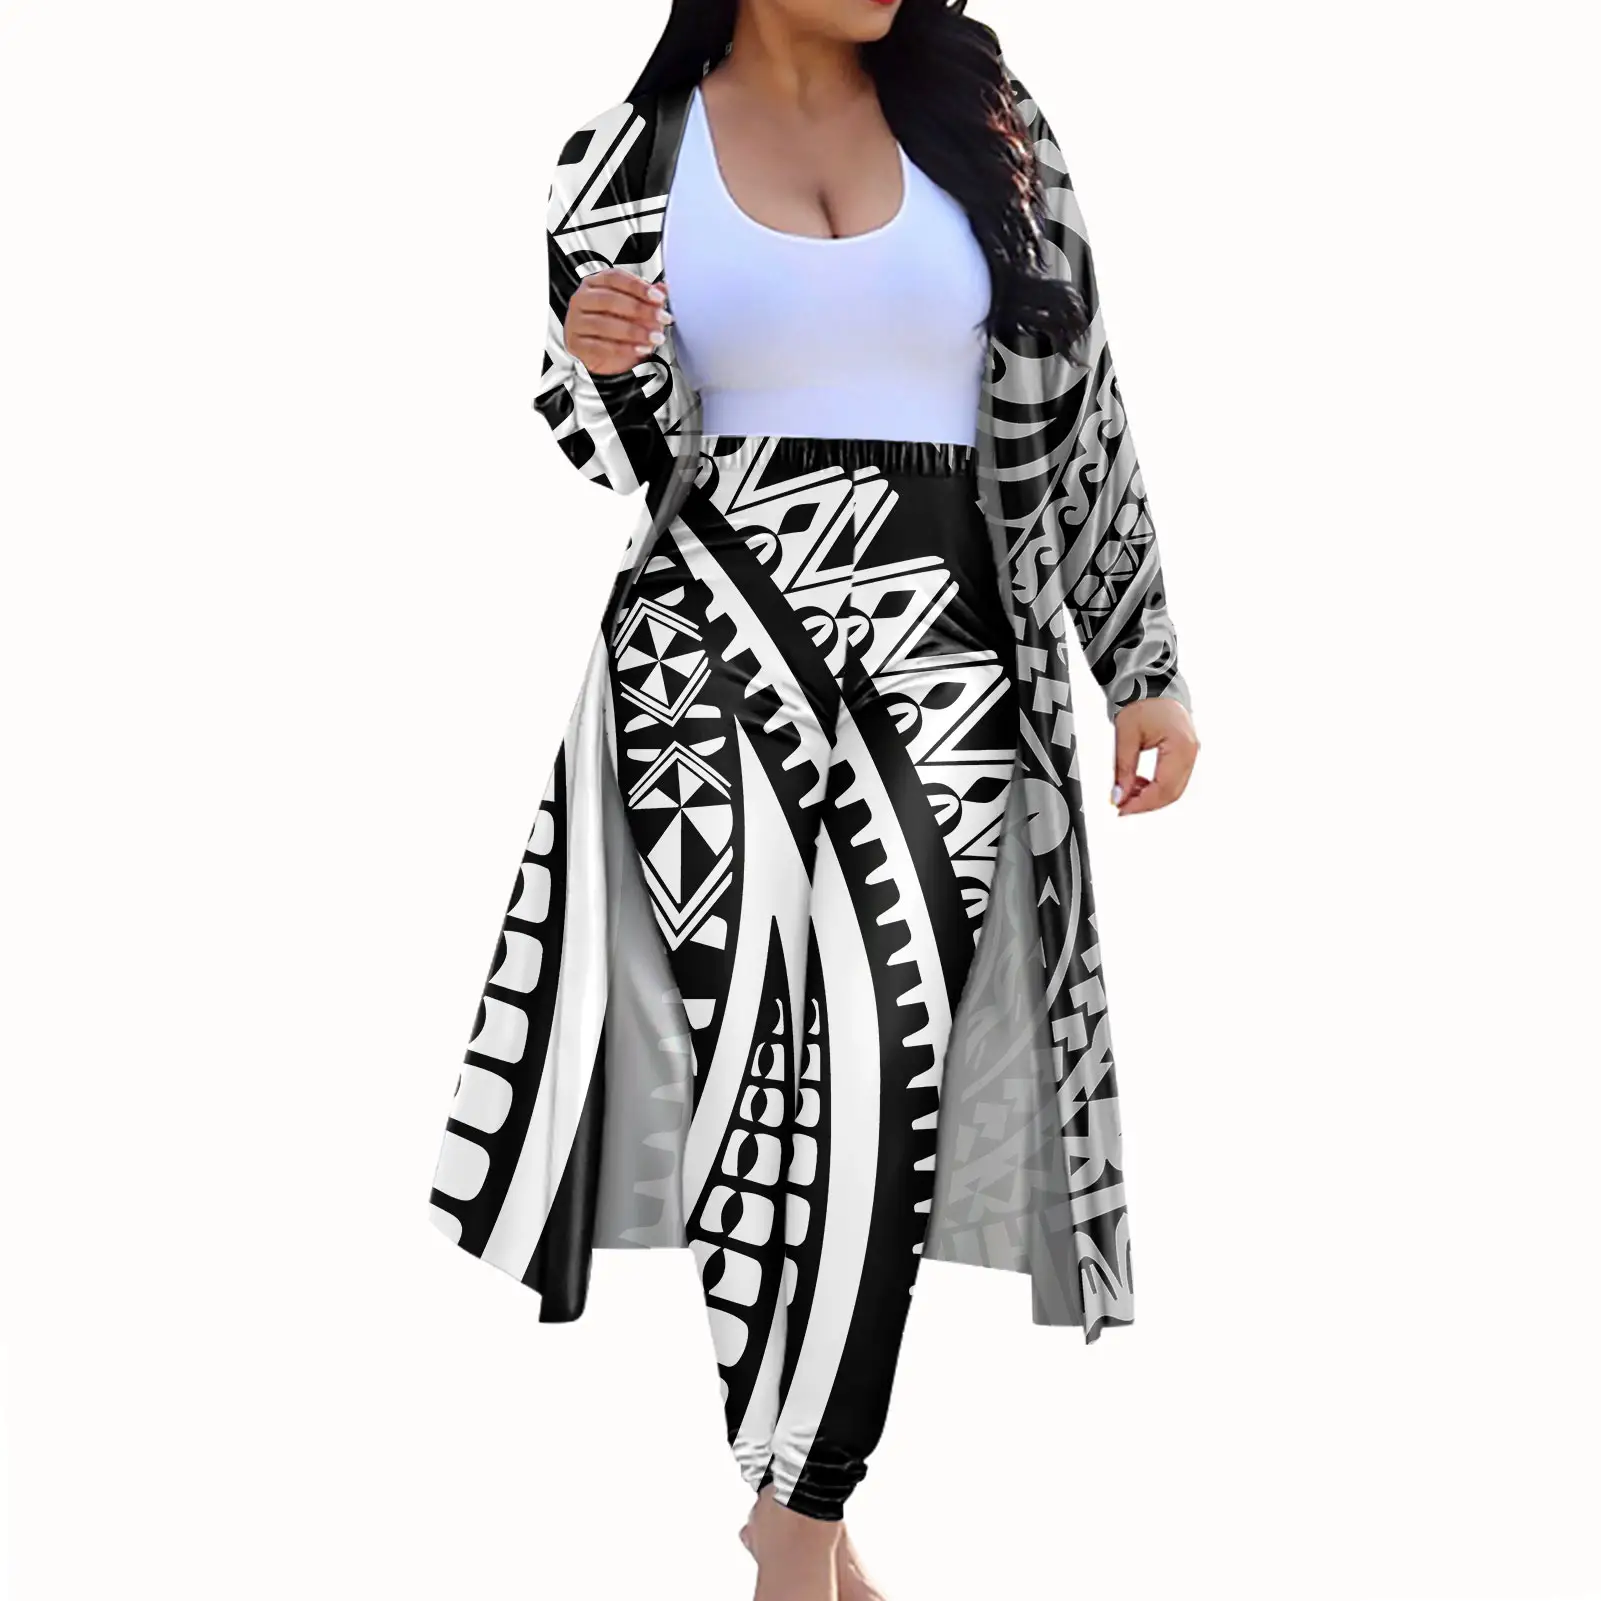 New Arrivals Hawaii Polynesian Style Black-White Hibiscus Printed Casual Long Coat Cloak and Skinny Pants 2piece Women Outfit